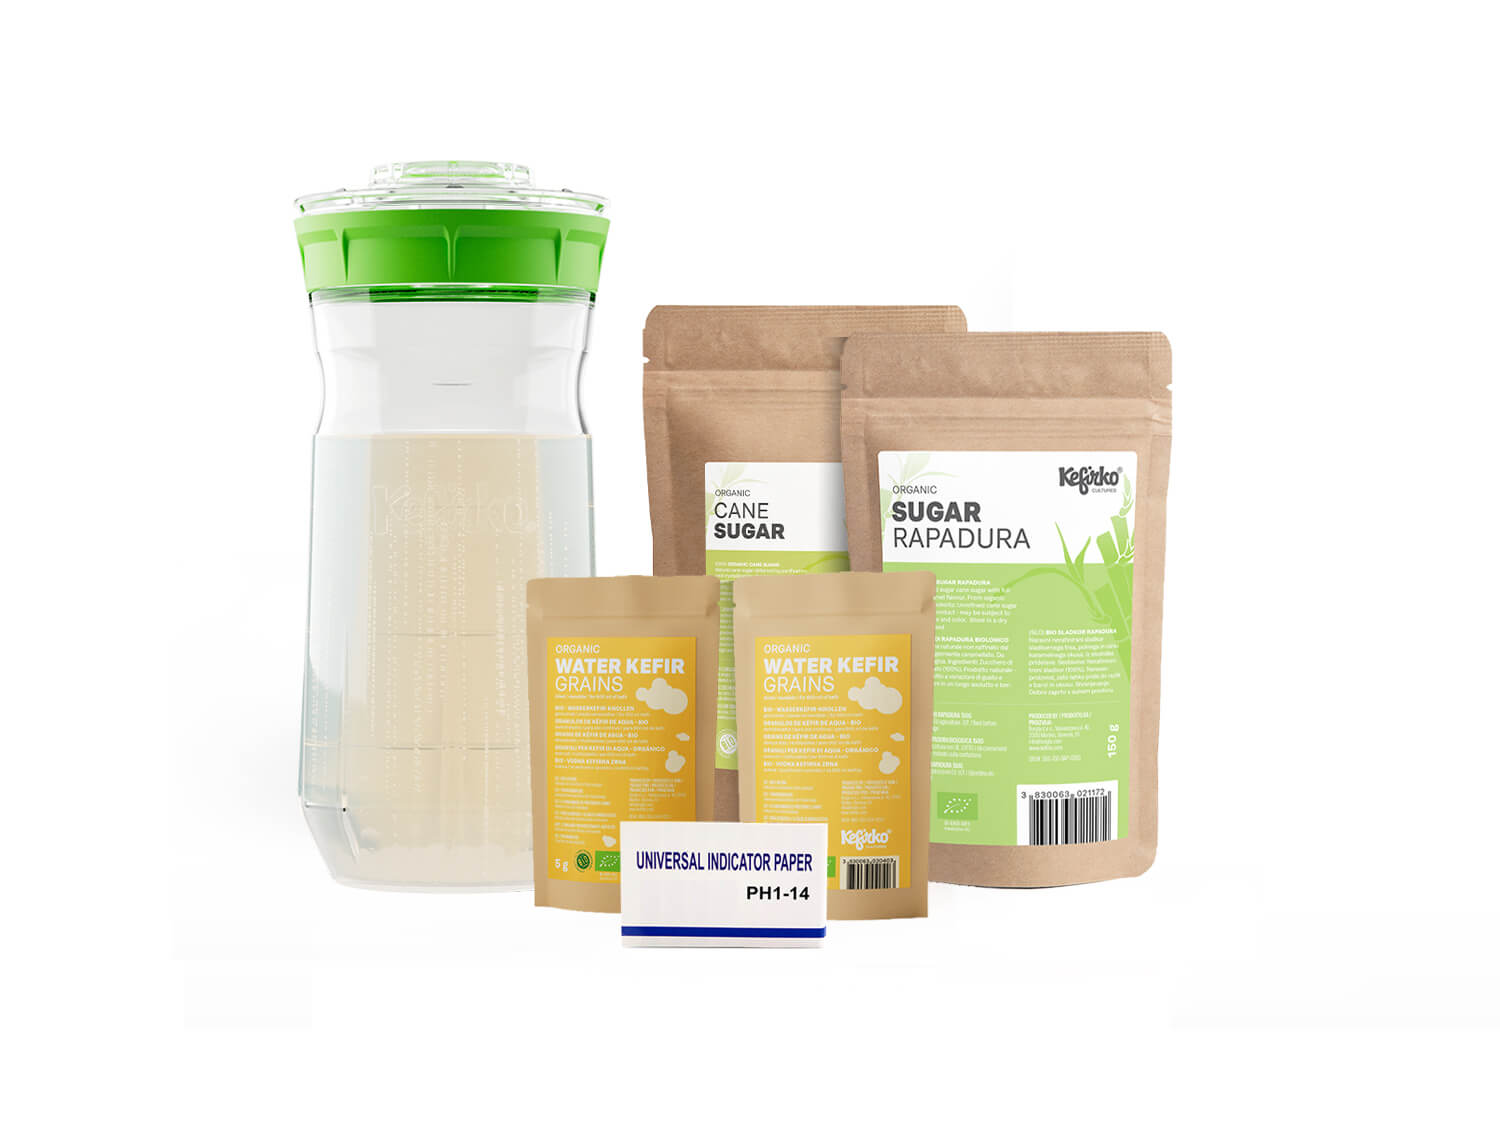 Kefirko Fermenter Kit Easily Brew Your Own Milk or Water Kefir at Home, or  Grow Sprouted Seeds -  Norway